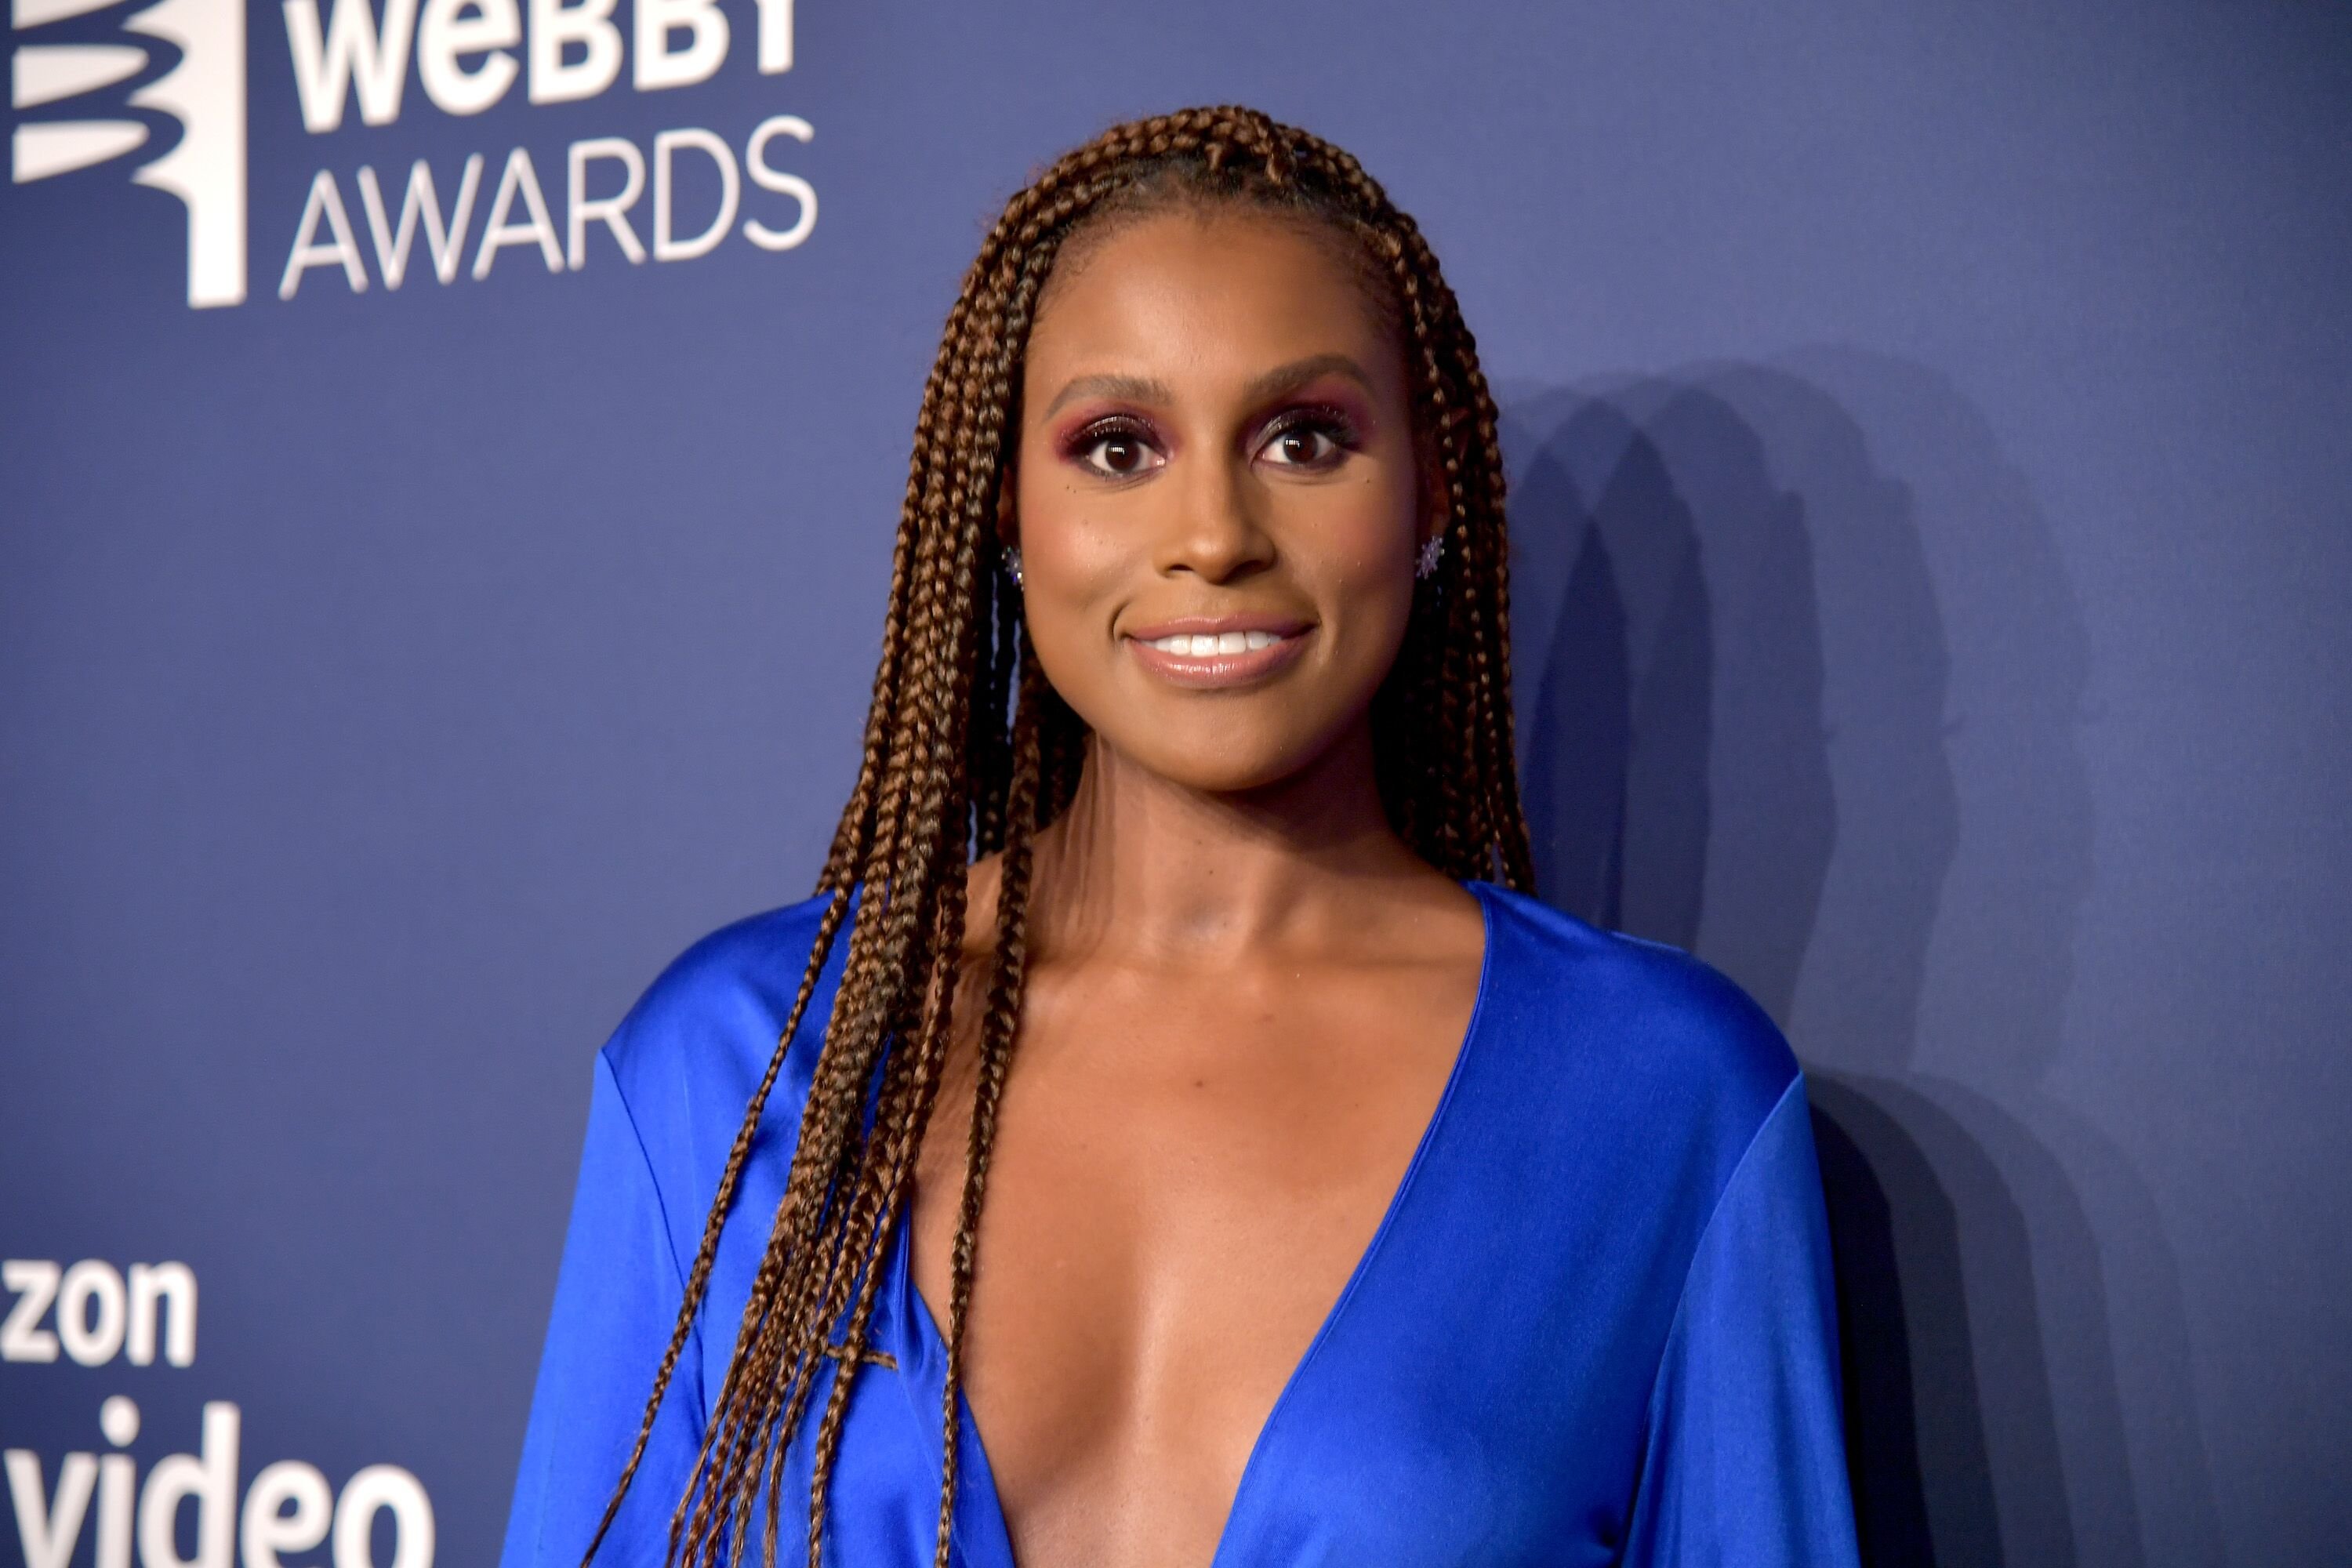 Issa Rae at the 2019 Webby Awards in New York City/ Source: Getty Images